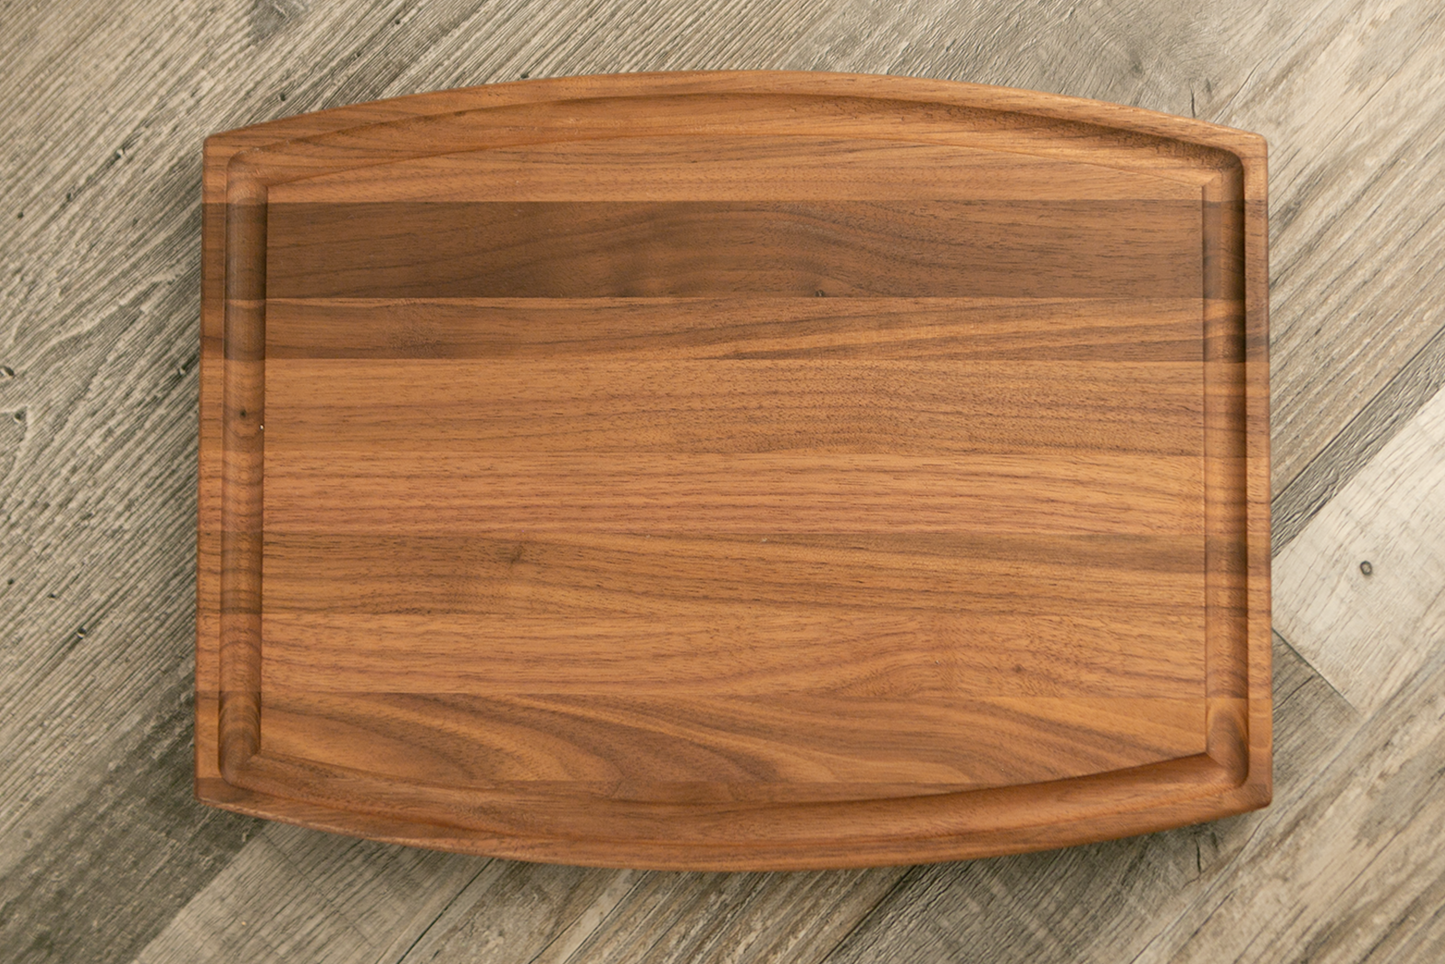 Walnut Charcuterie / Cutting Board - 9"x12" Curved with Juice Groove